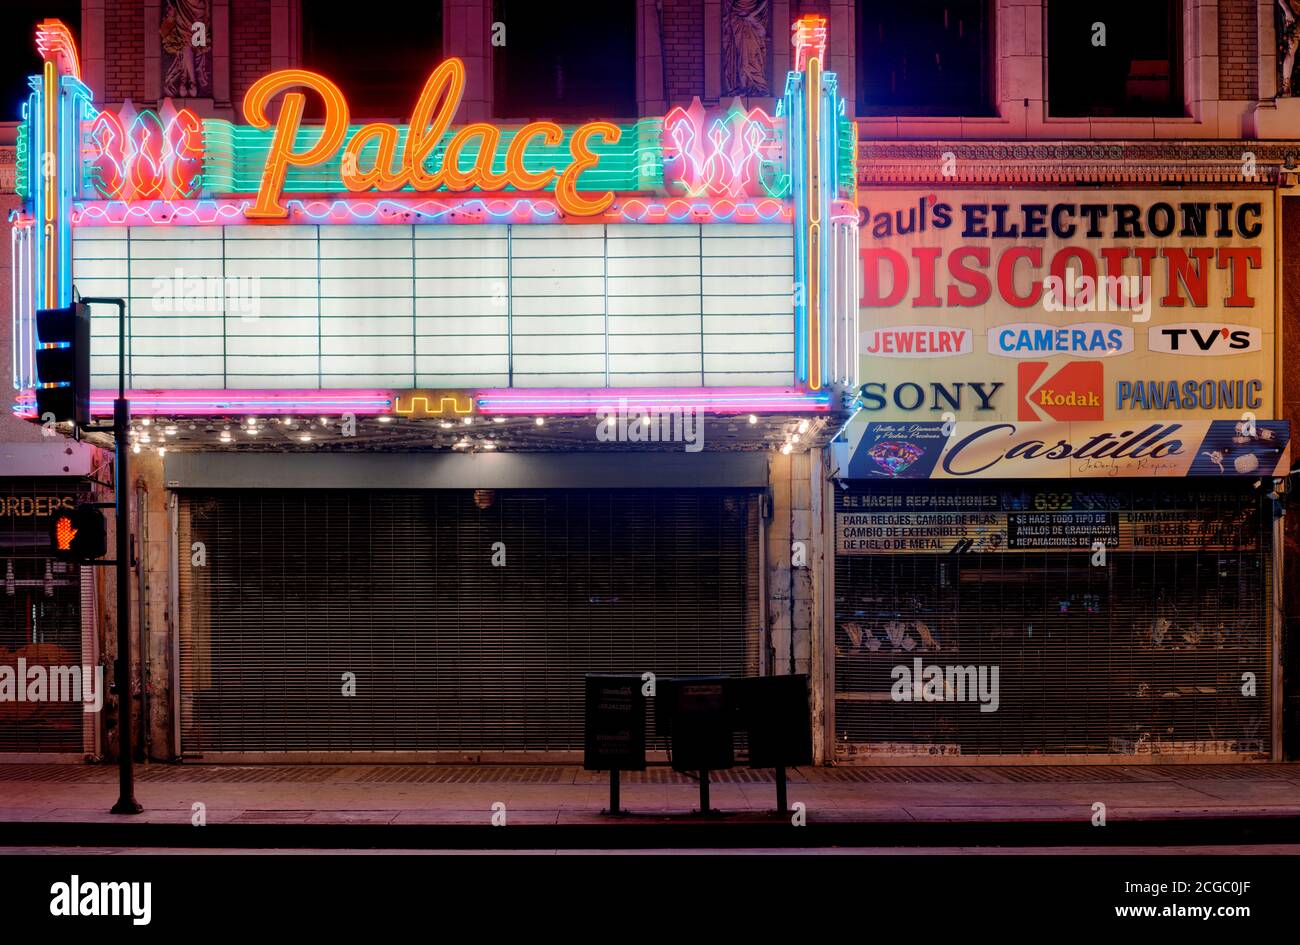 A night shot of Palace Theater neon sign facade, Los Angeles, california, USA. Stock Photo